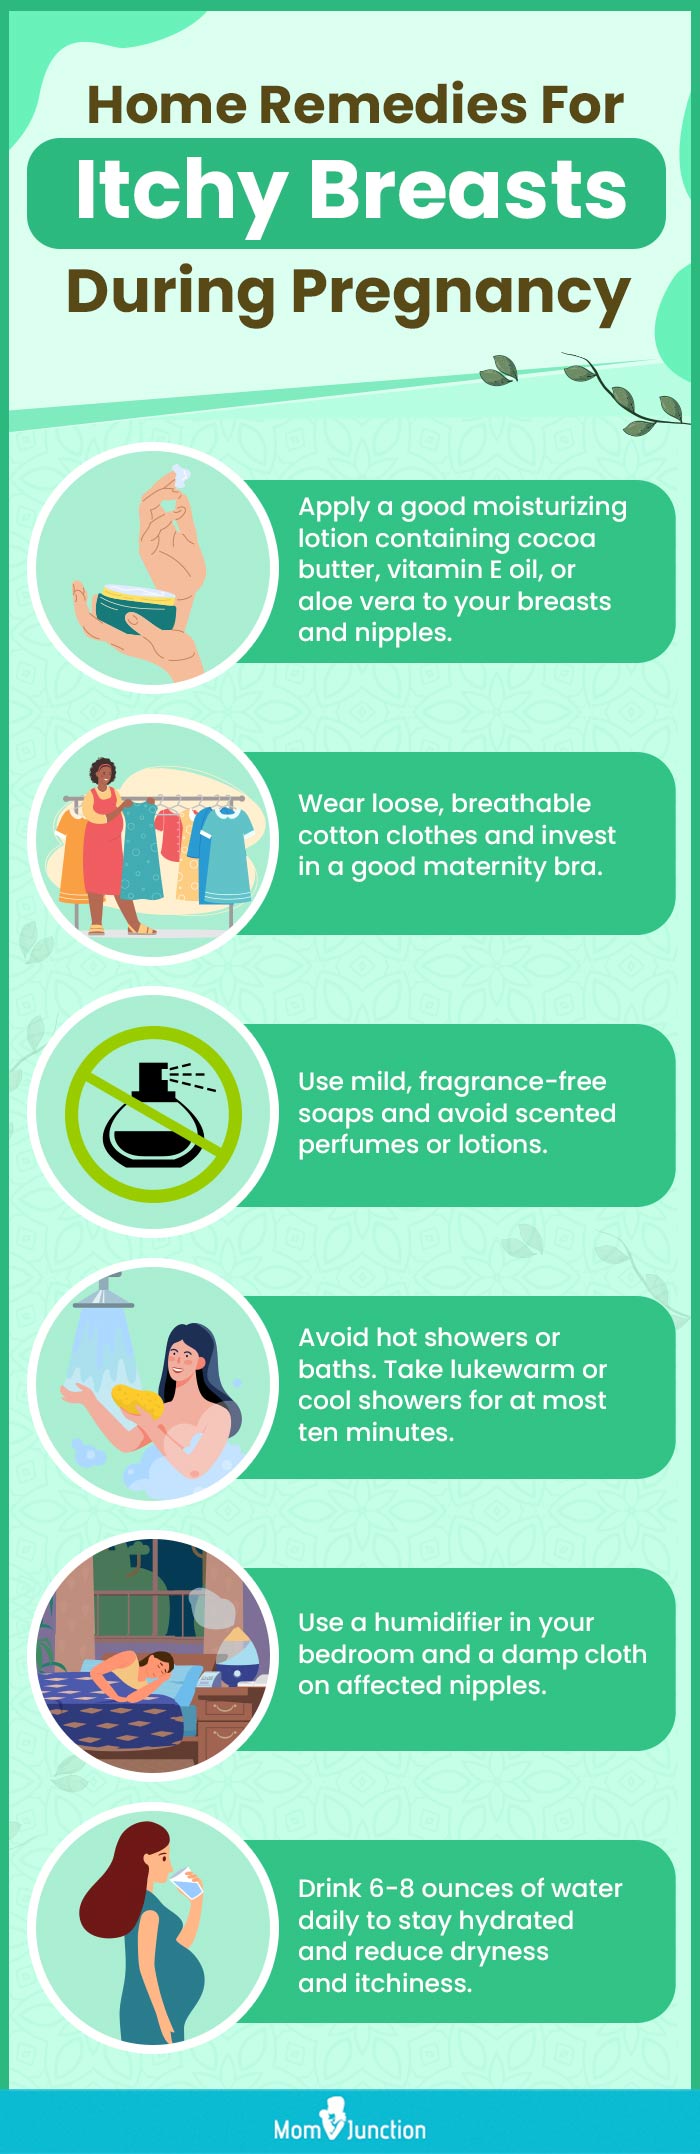 https://www.momjunction.com/wp-content/uploads/2023/02/Home-Remedies-For-Itchy-Breasts-During-Pregnancy.jpg